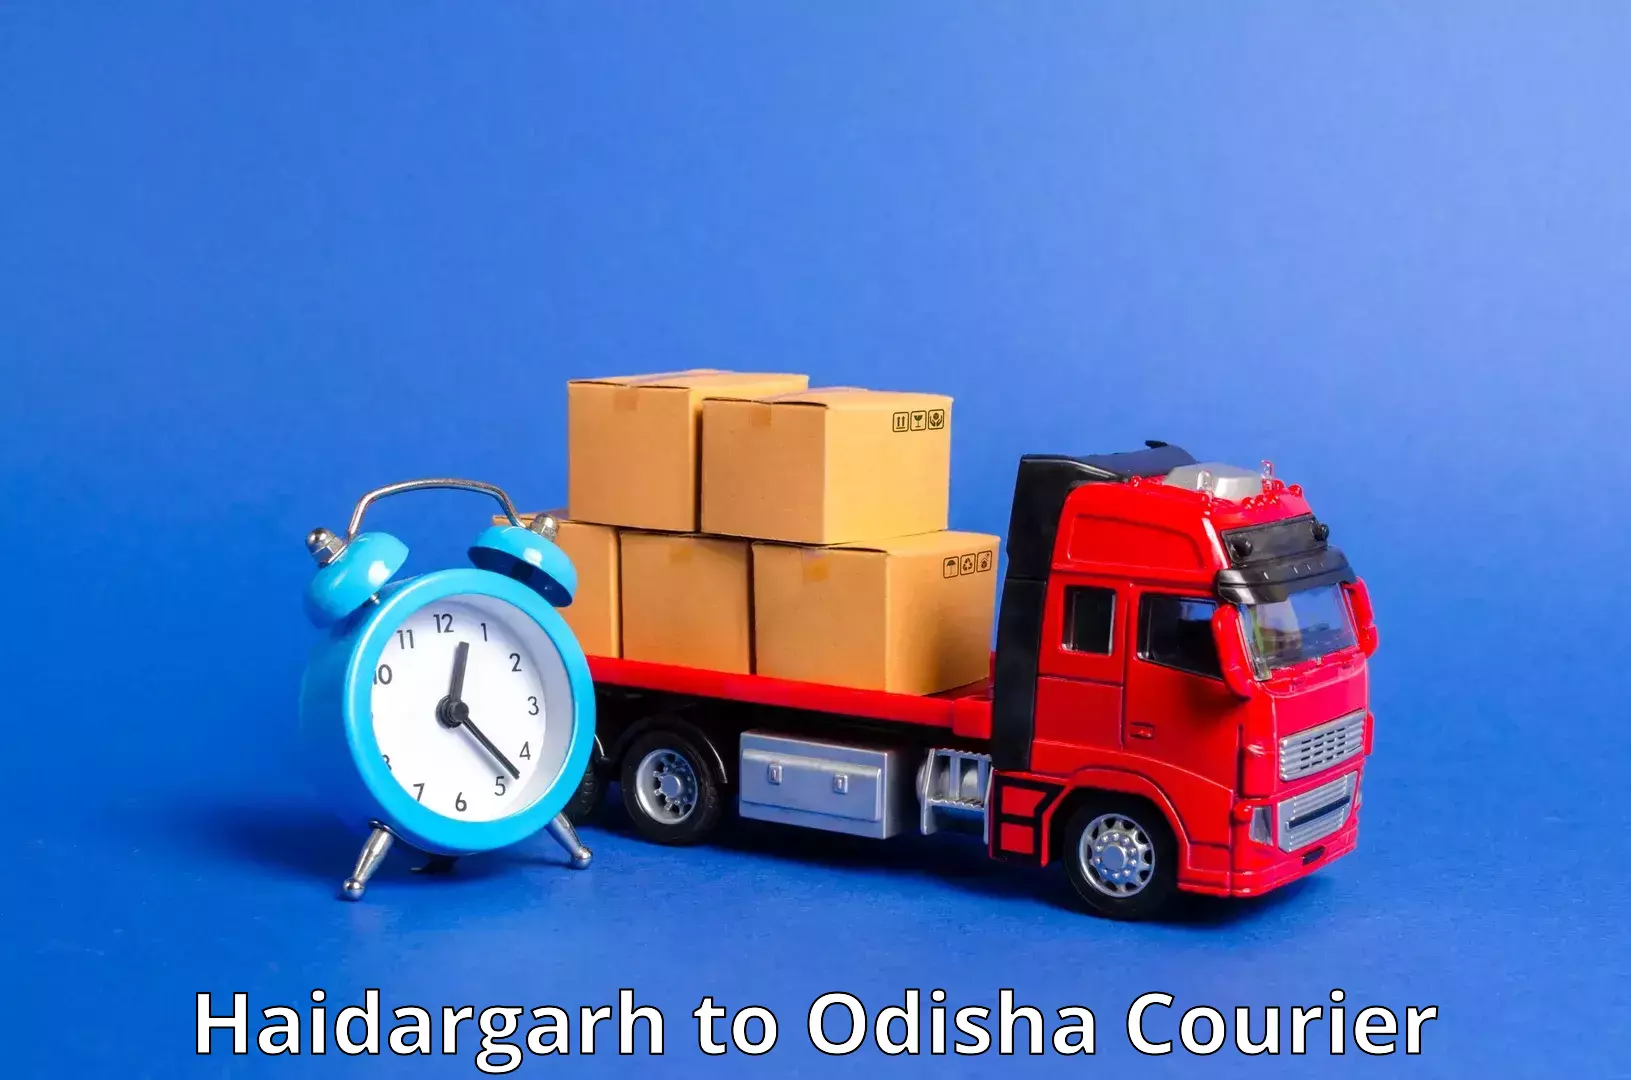 Express delivery network Haidargarh to Paradip